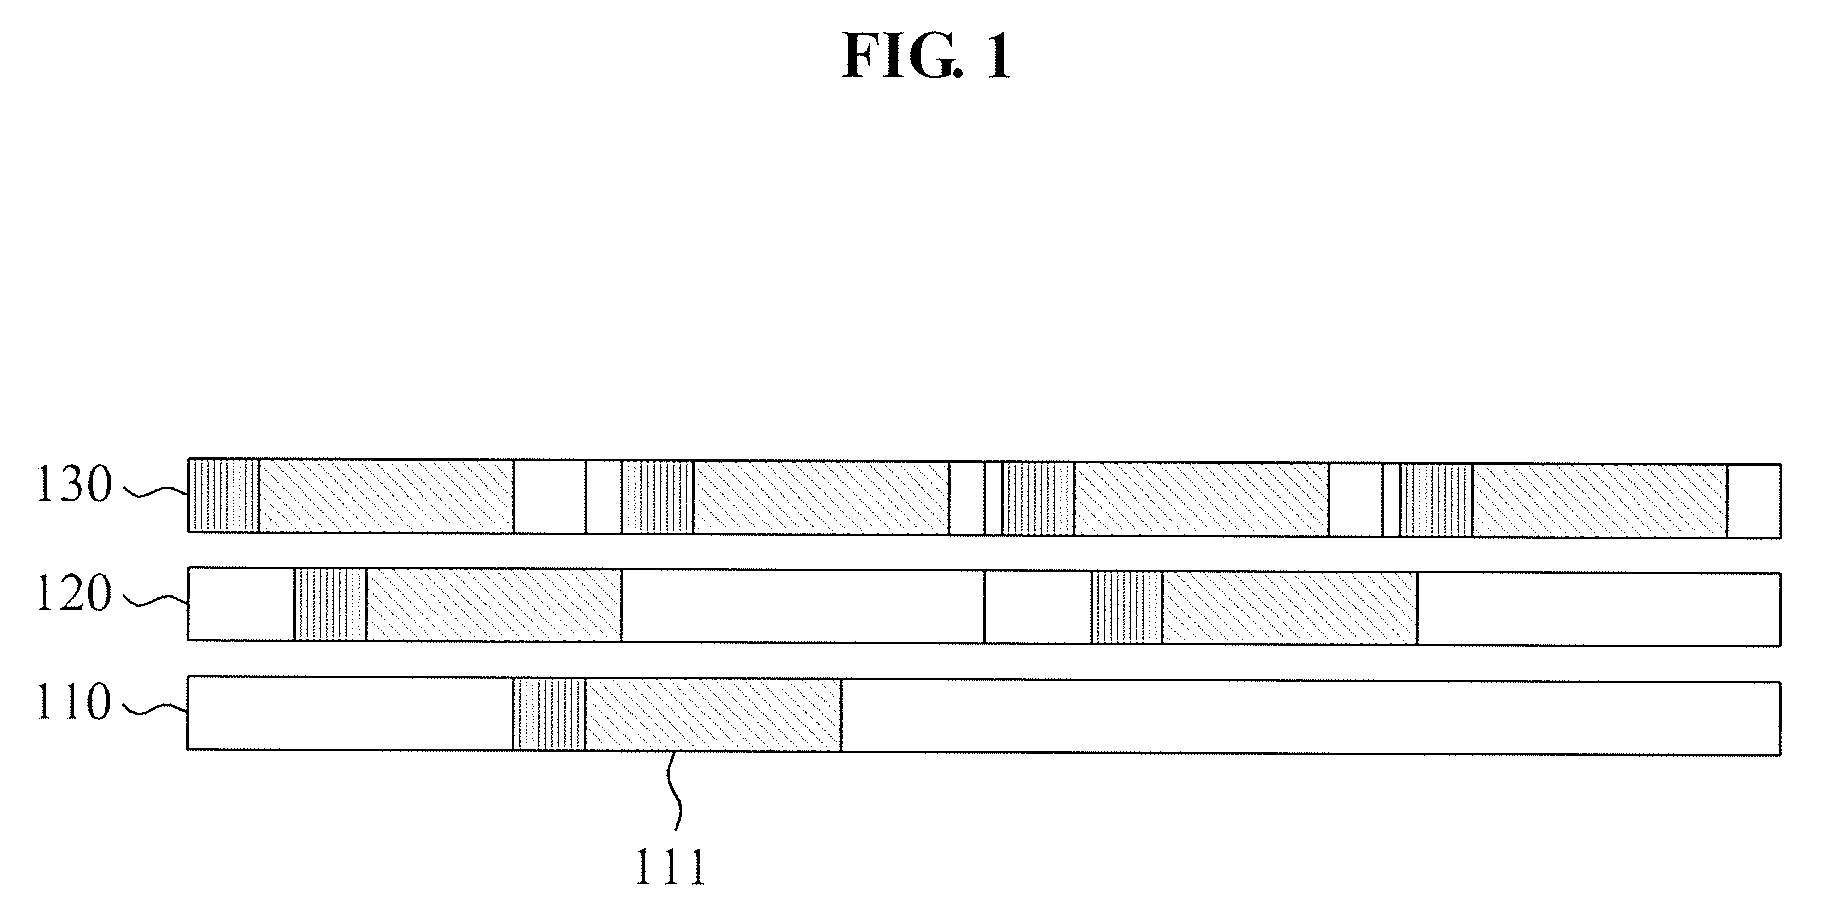 Hierarchical random acces method for wireless communication system having significantly large cell